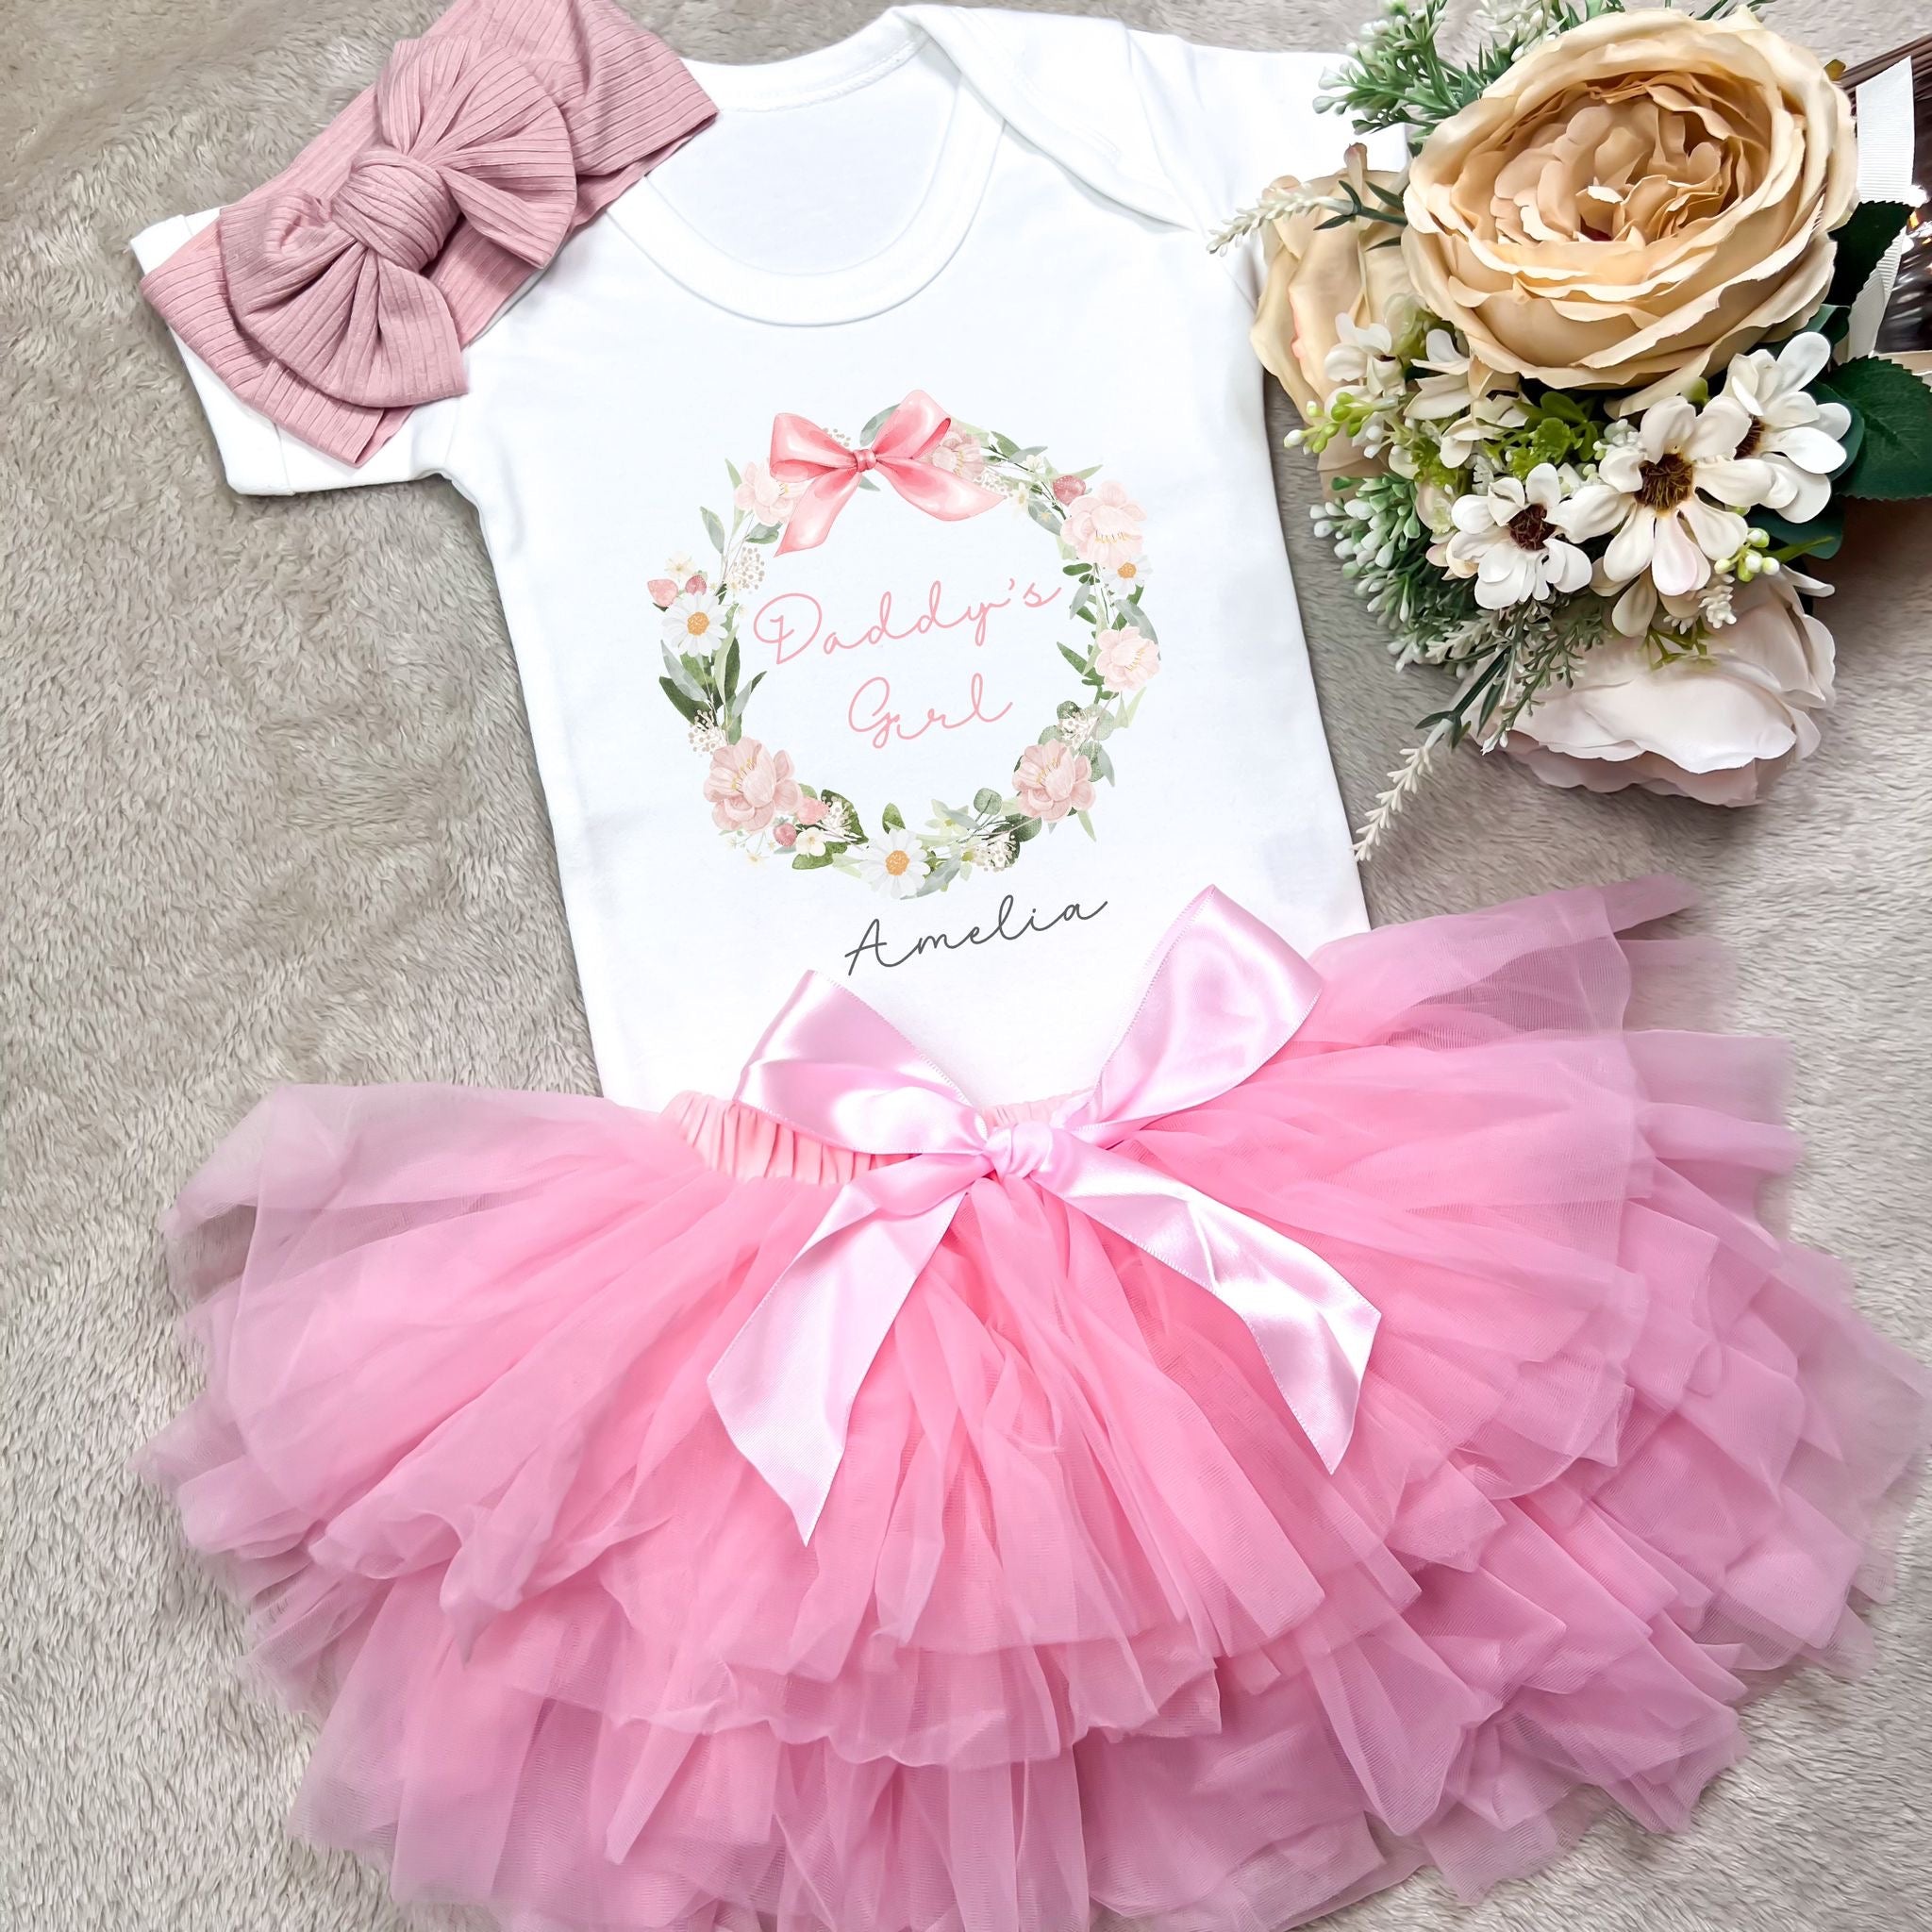 Personalised Father's Day Vest & Tutu - Pink Daddy's Girl Design